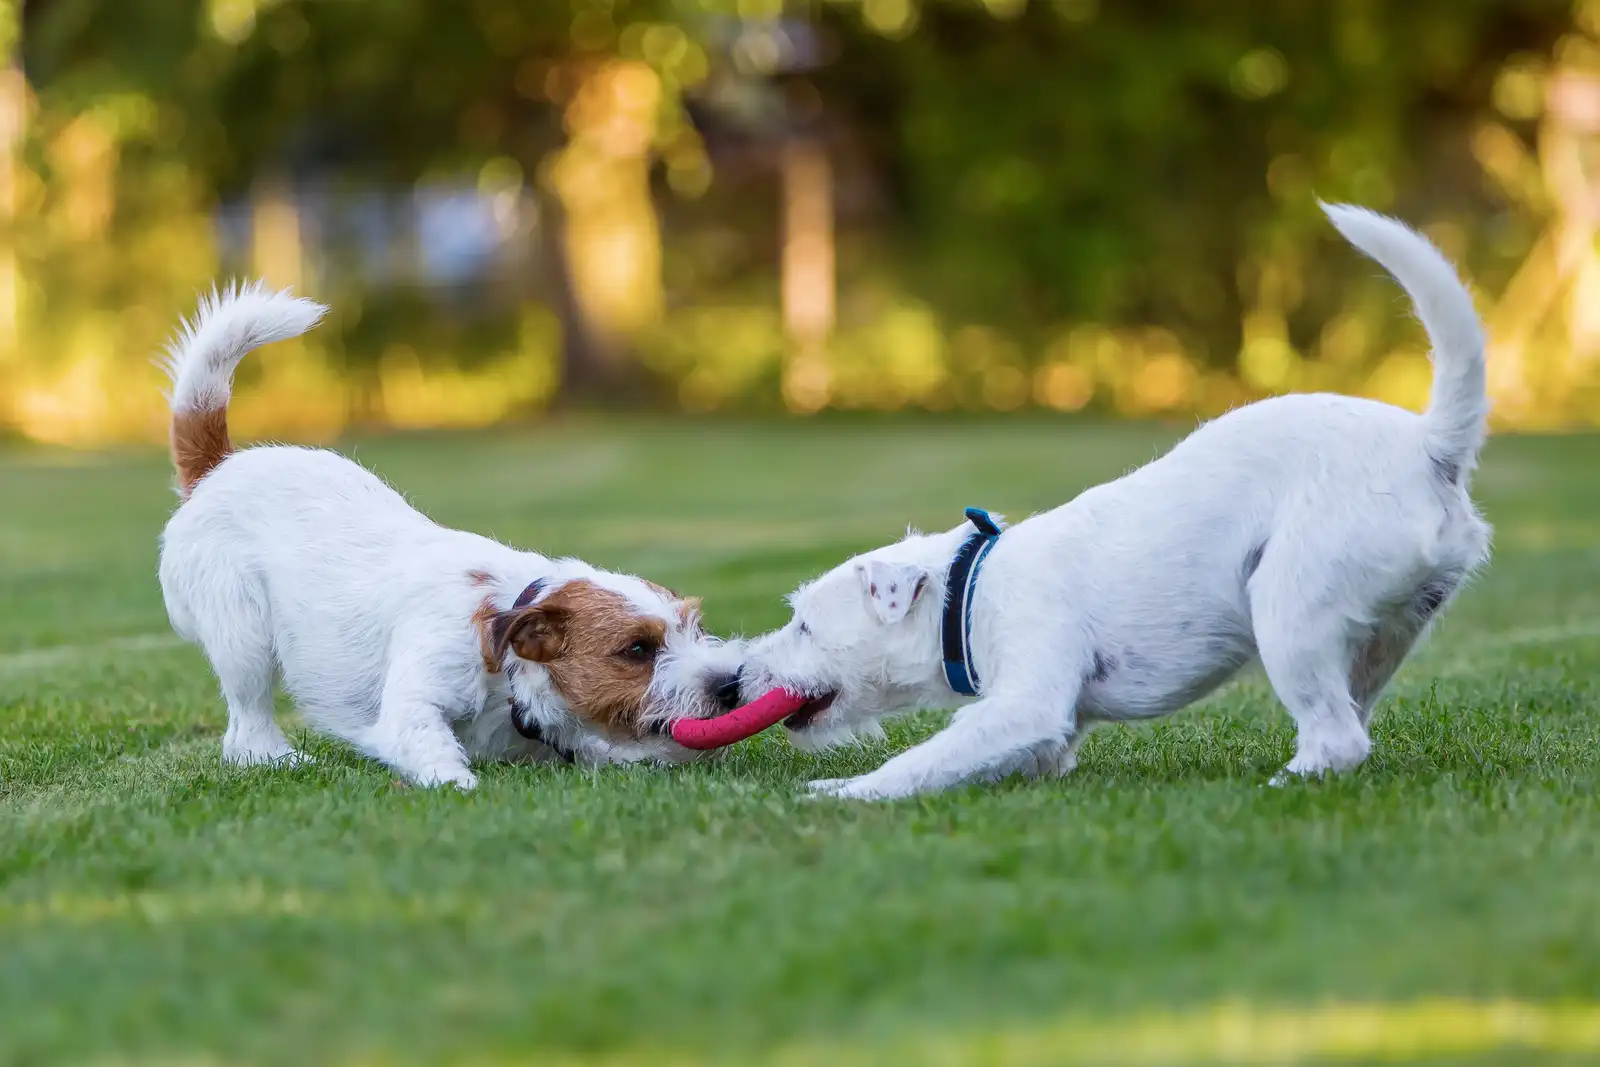 Why do dogs like to play tug of war so much?